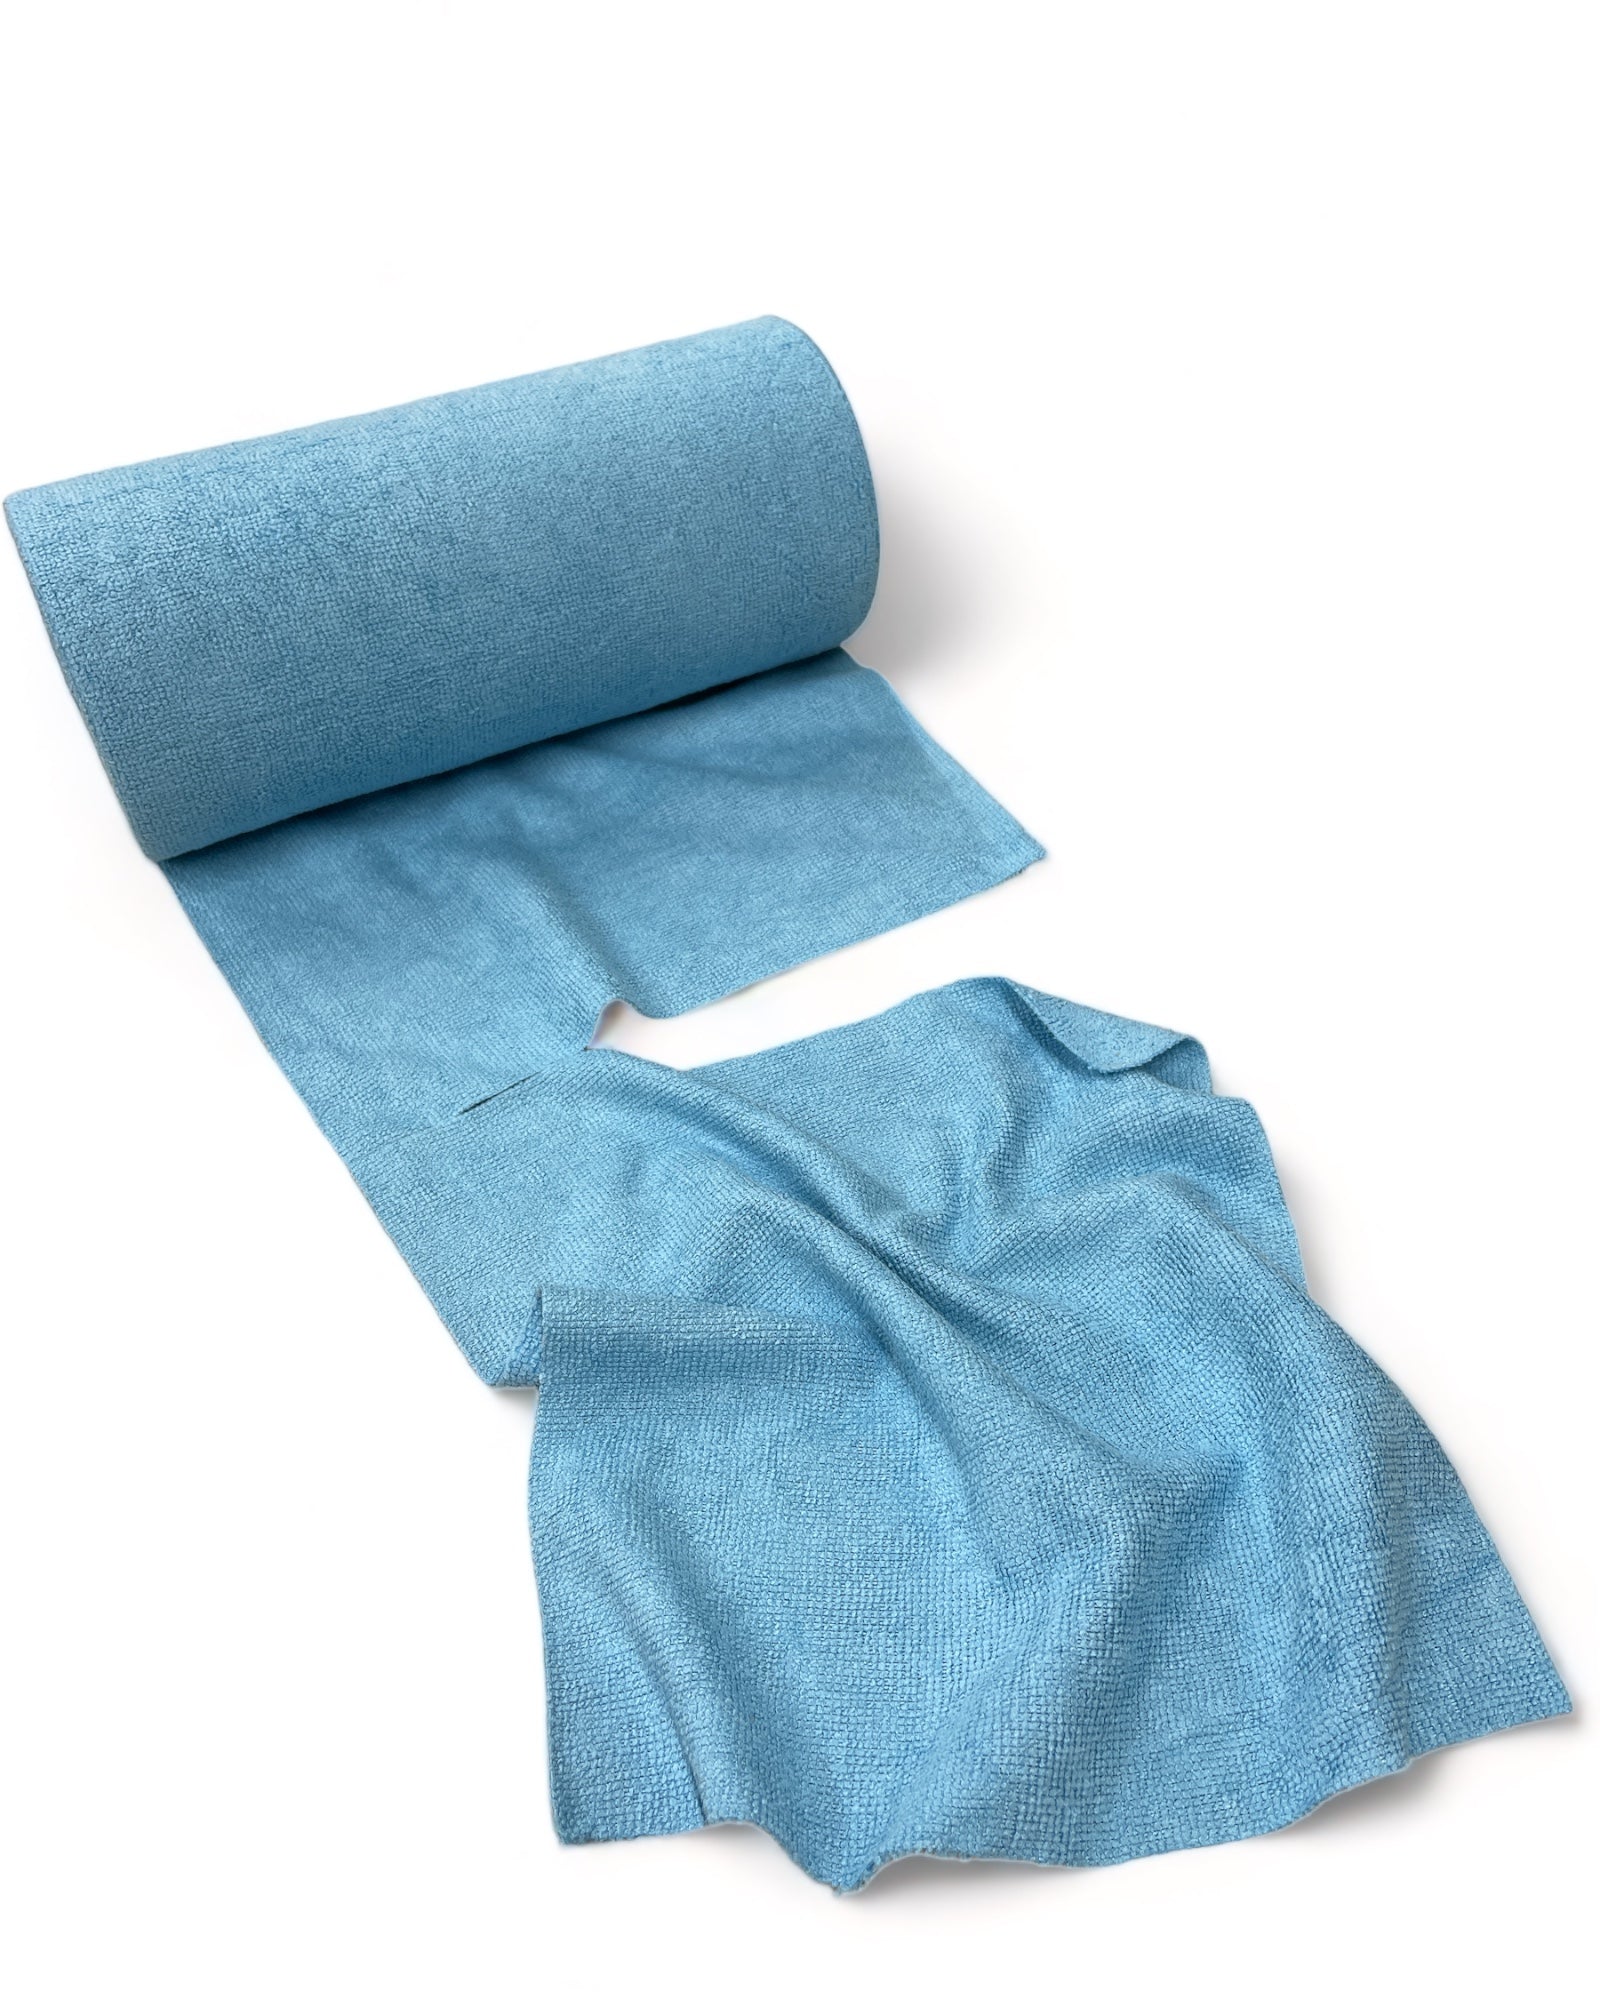 The Benefits of Using Microfiber Cloth for Window Cleaning